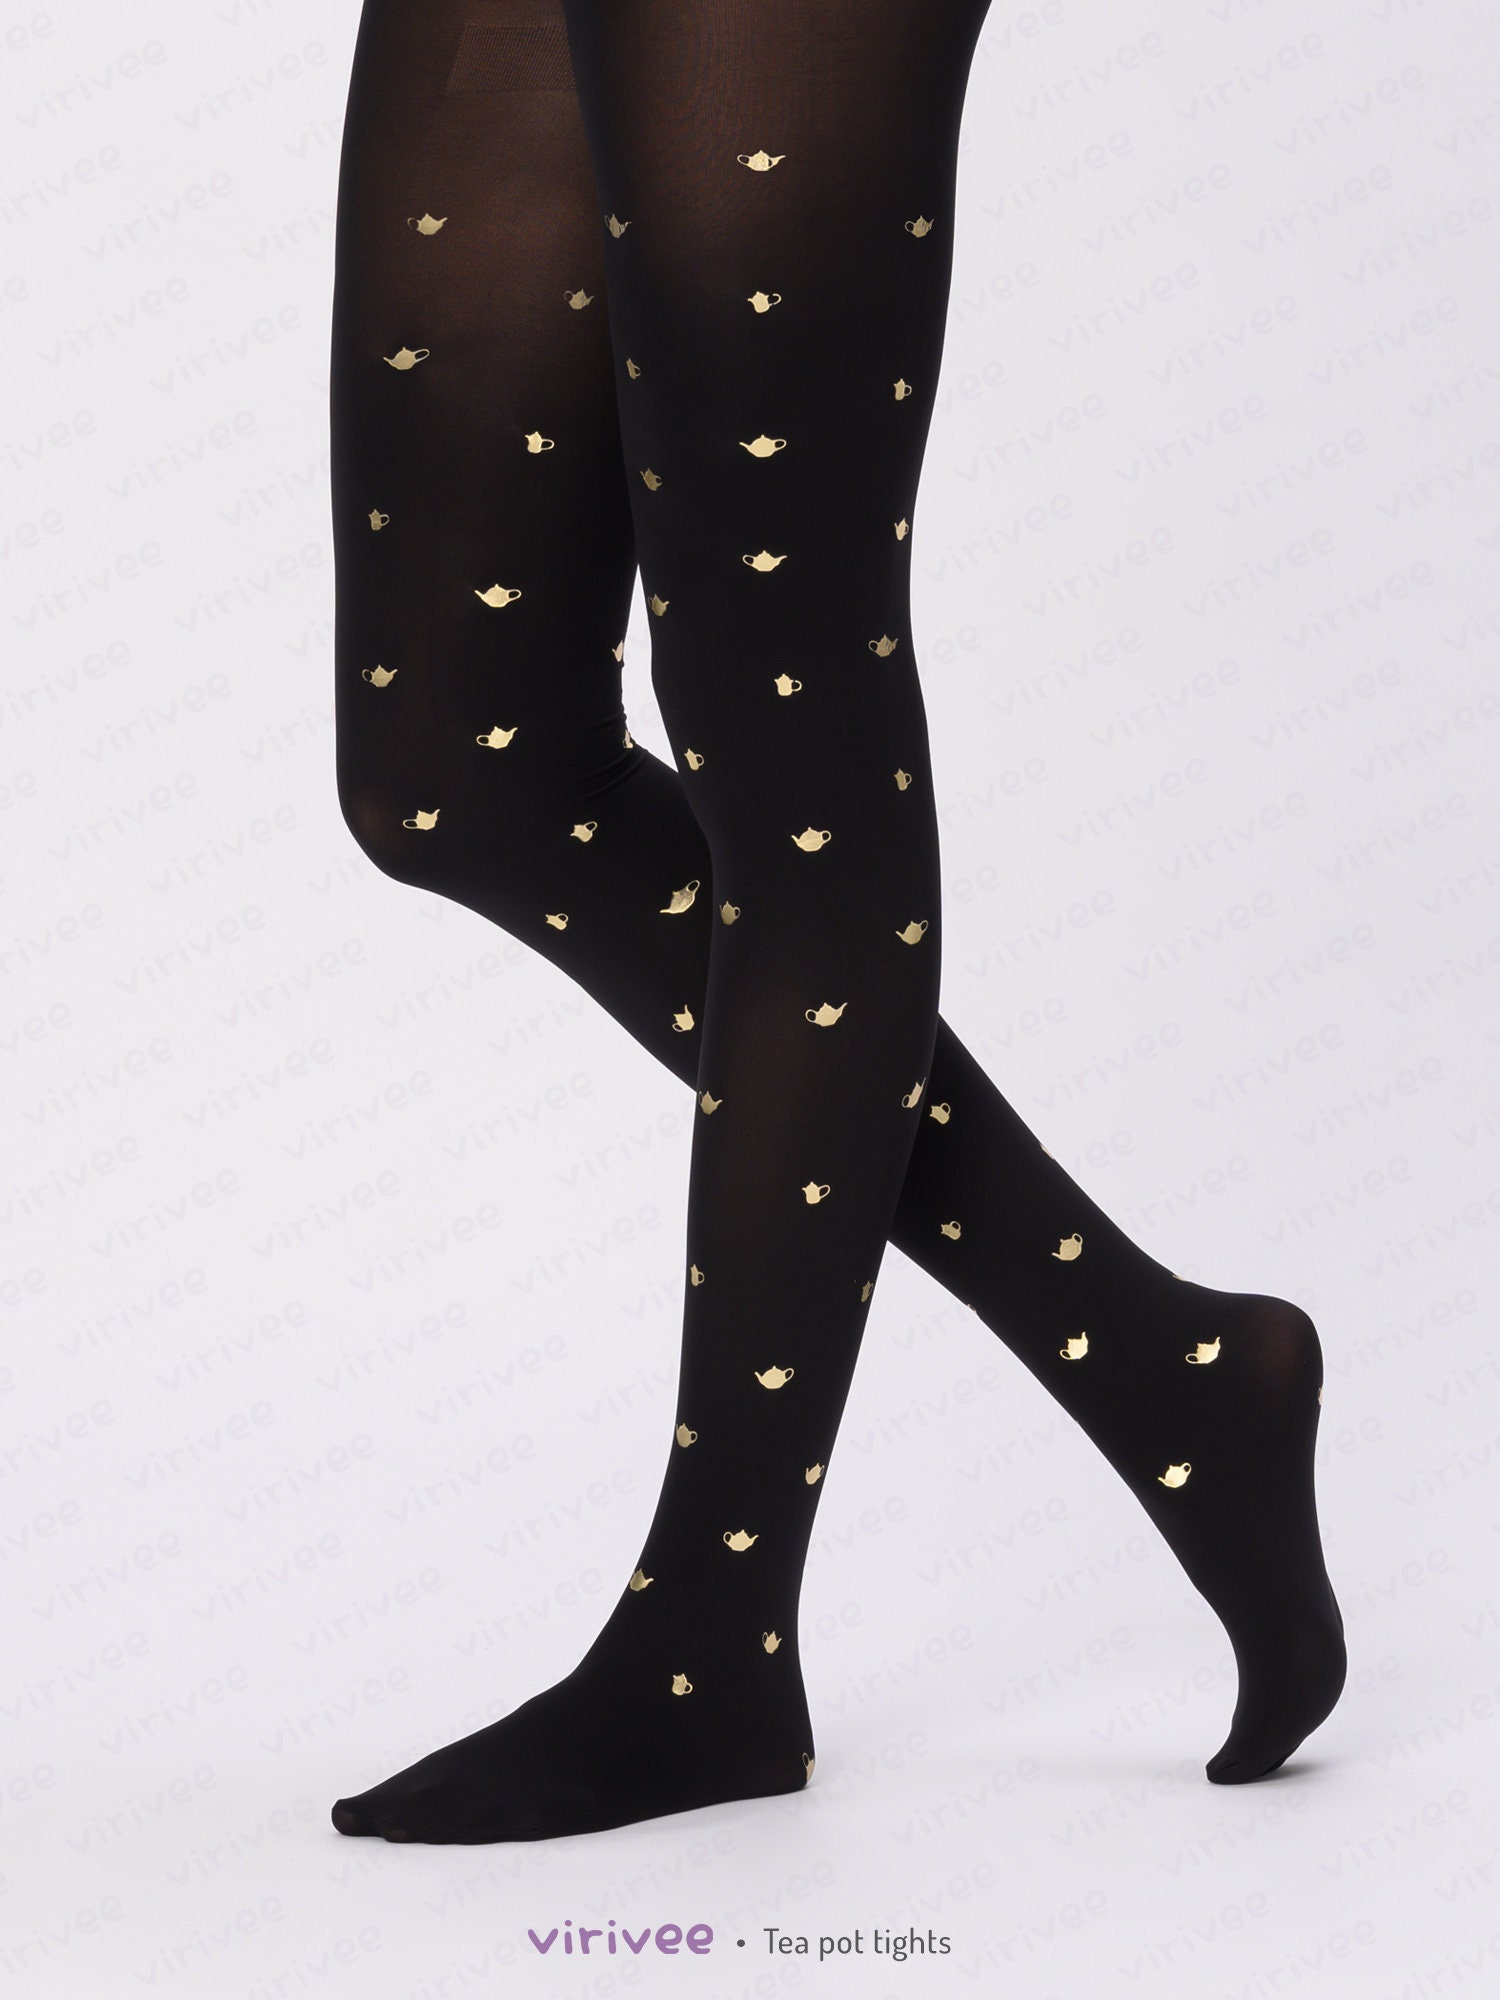 Bee Tights With Gold Print, Bumblebee Pattern on Black Opaque